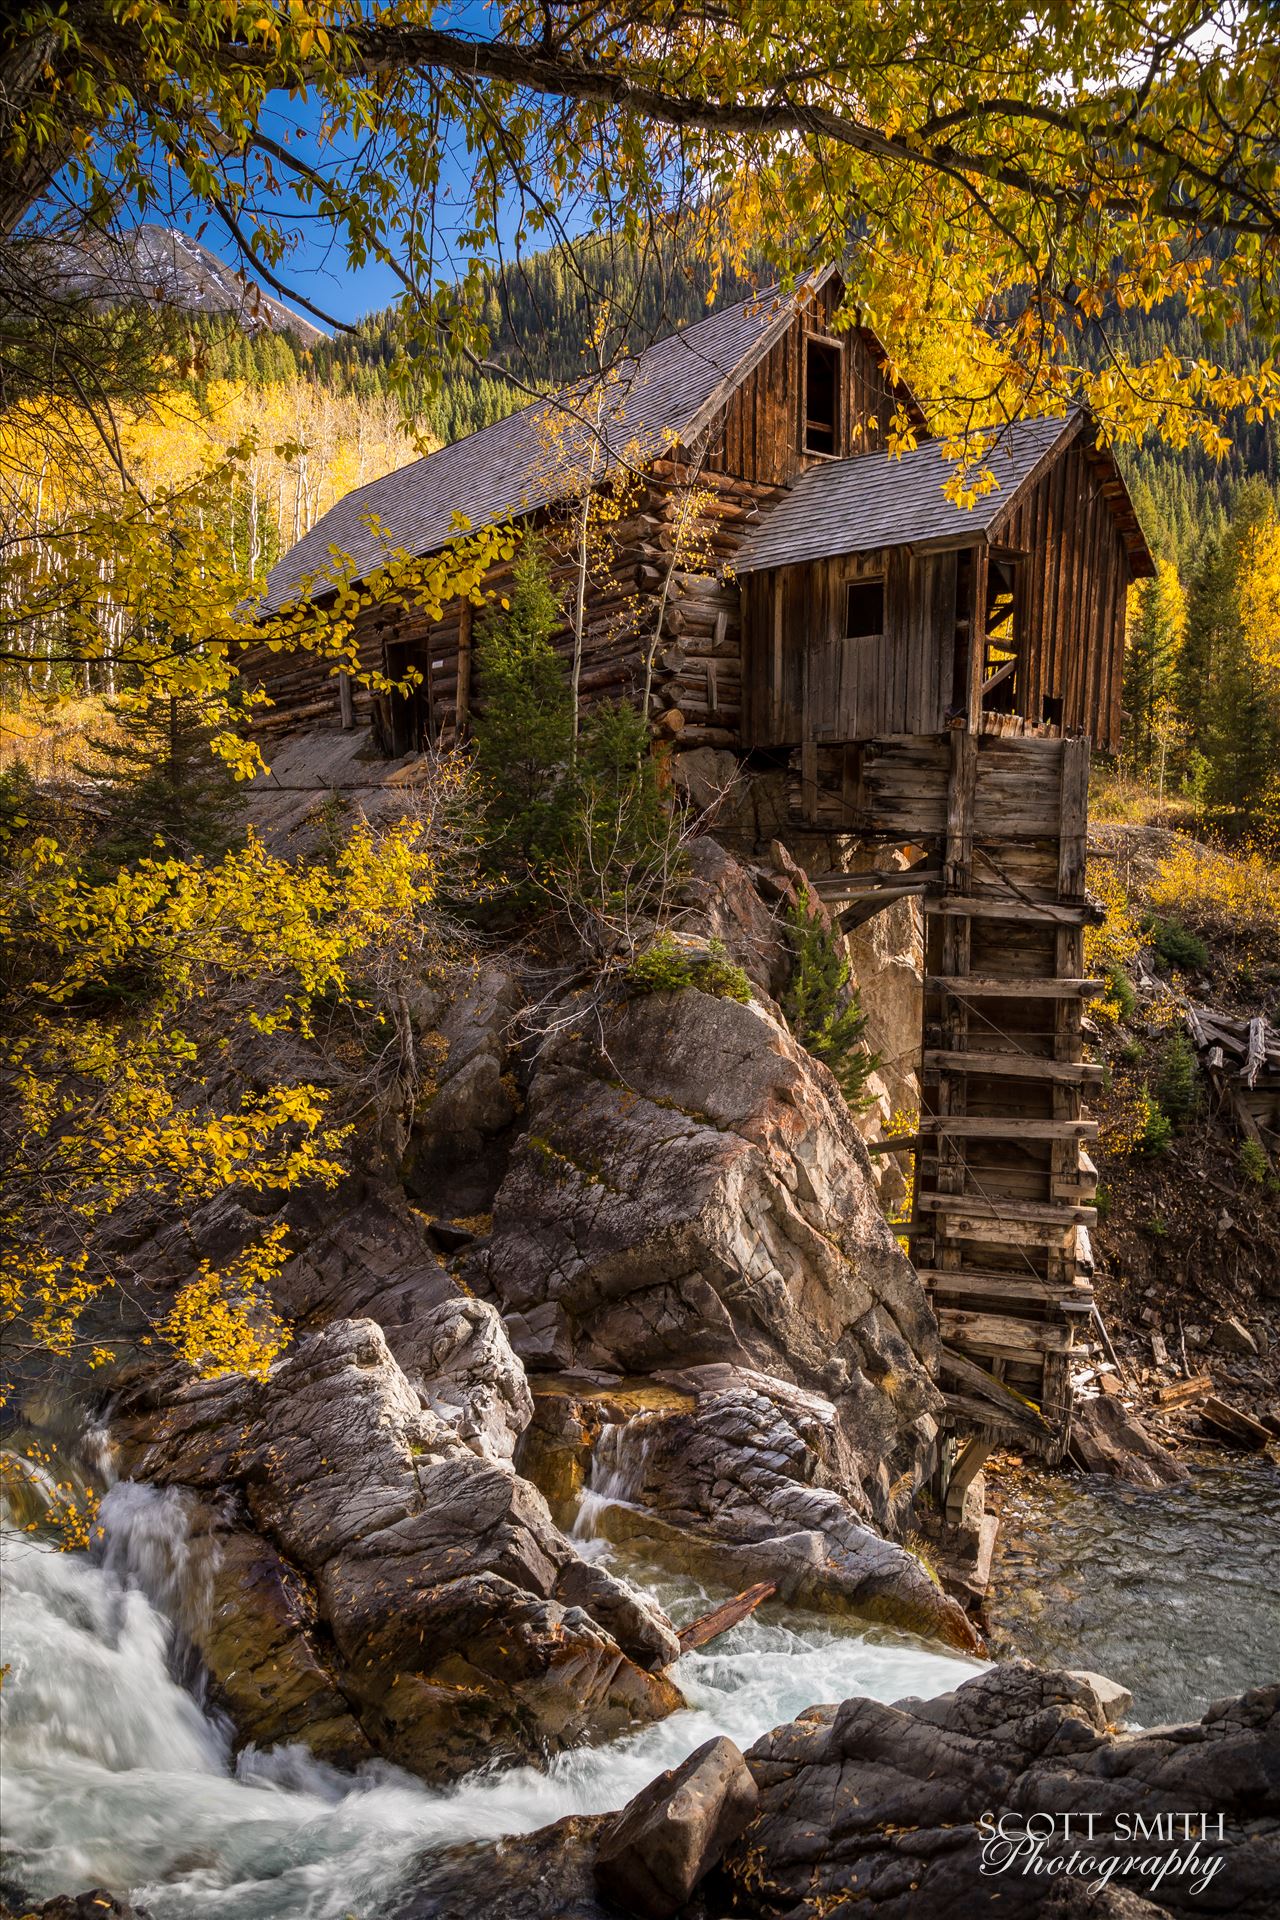 Crystal Mill No 2 The Crystal Mill, or the Old Mill is an 1892 wooden powerhouse located on an outcrop above the Crystal River in Crystal, Colorado by Scott Smith Photos